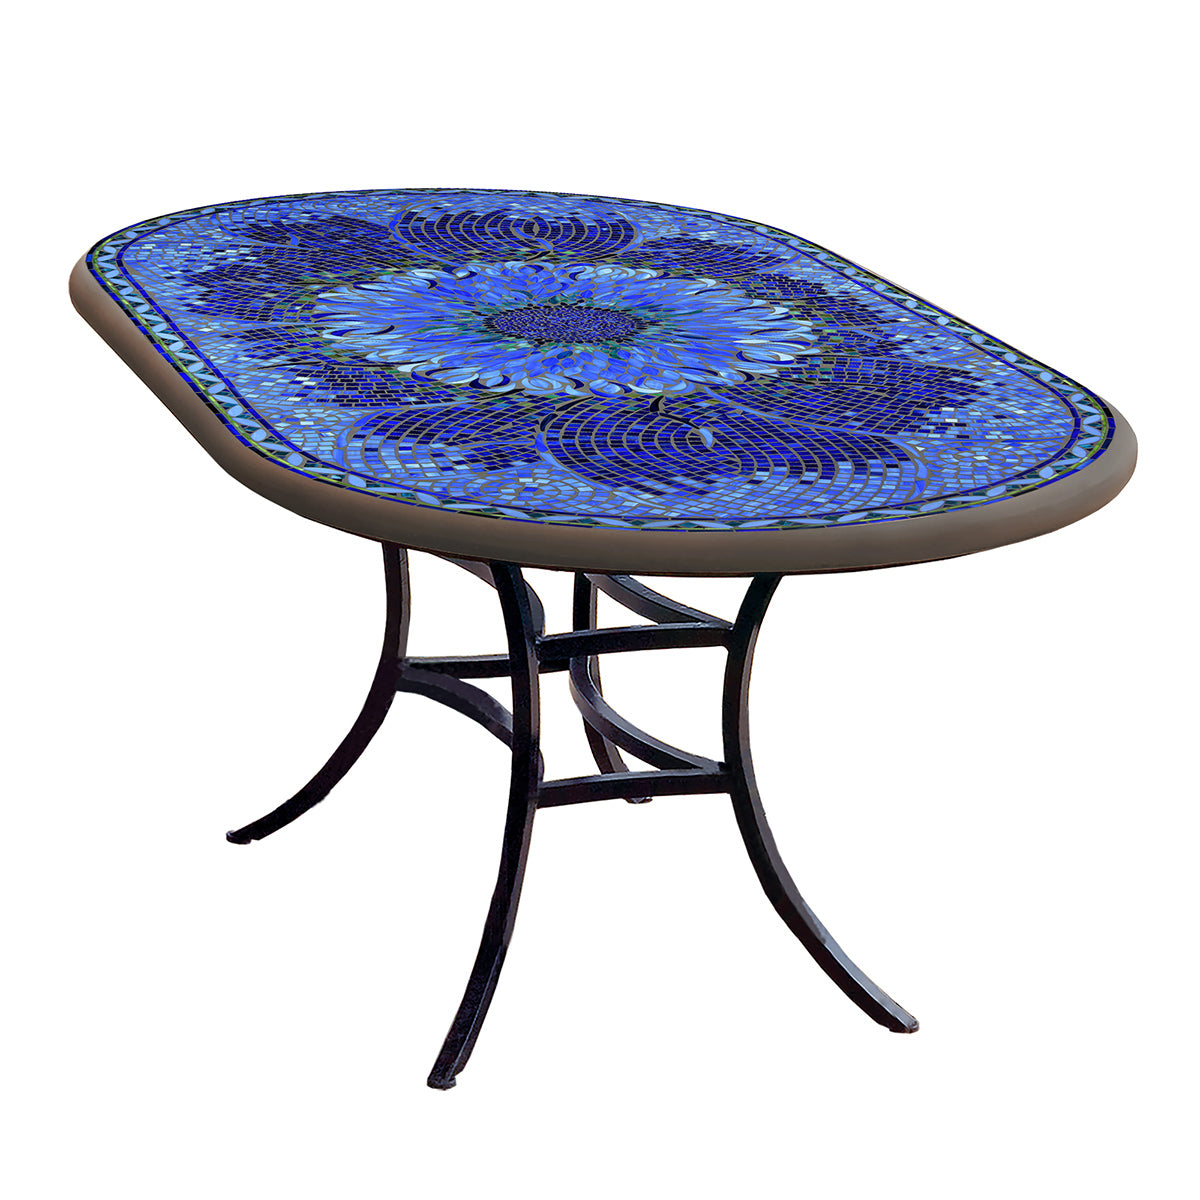 Bella Bloom Mosaic Oval Bistro-Iron Accents